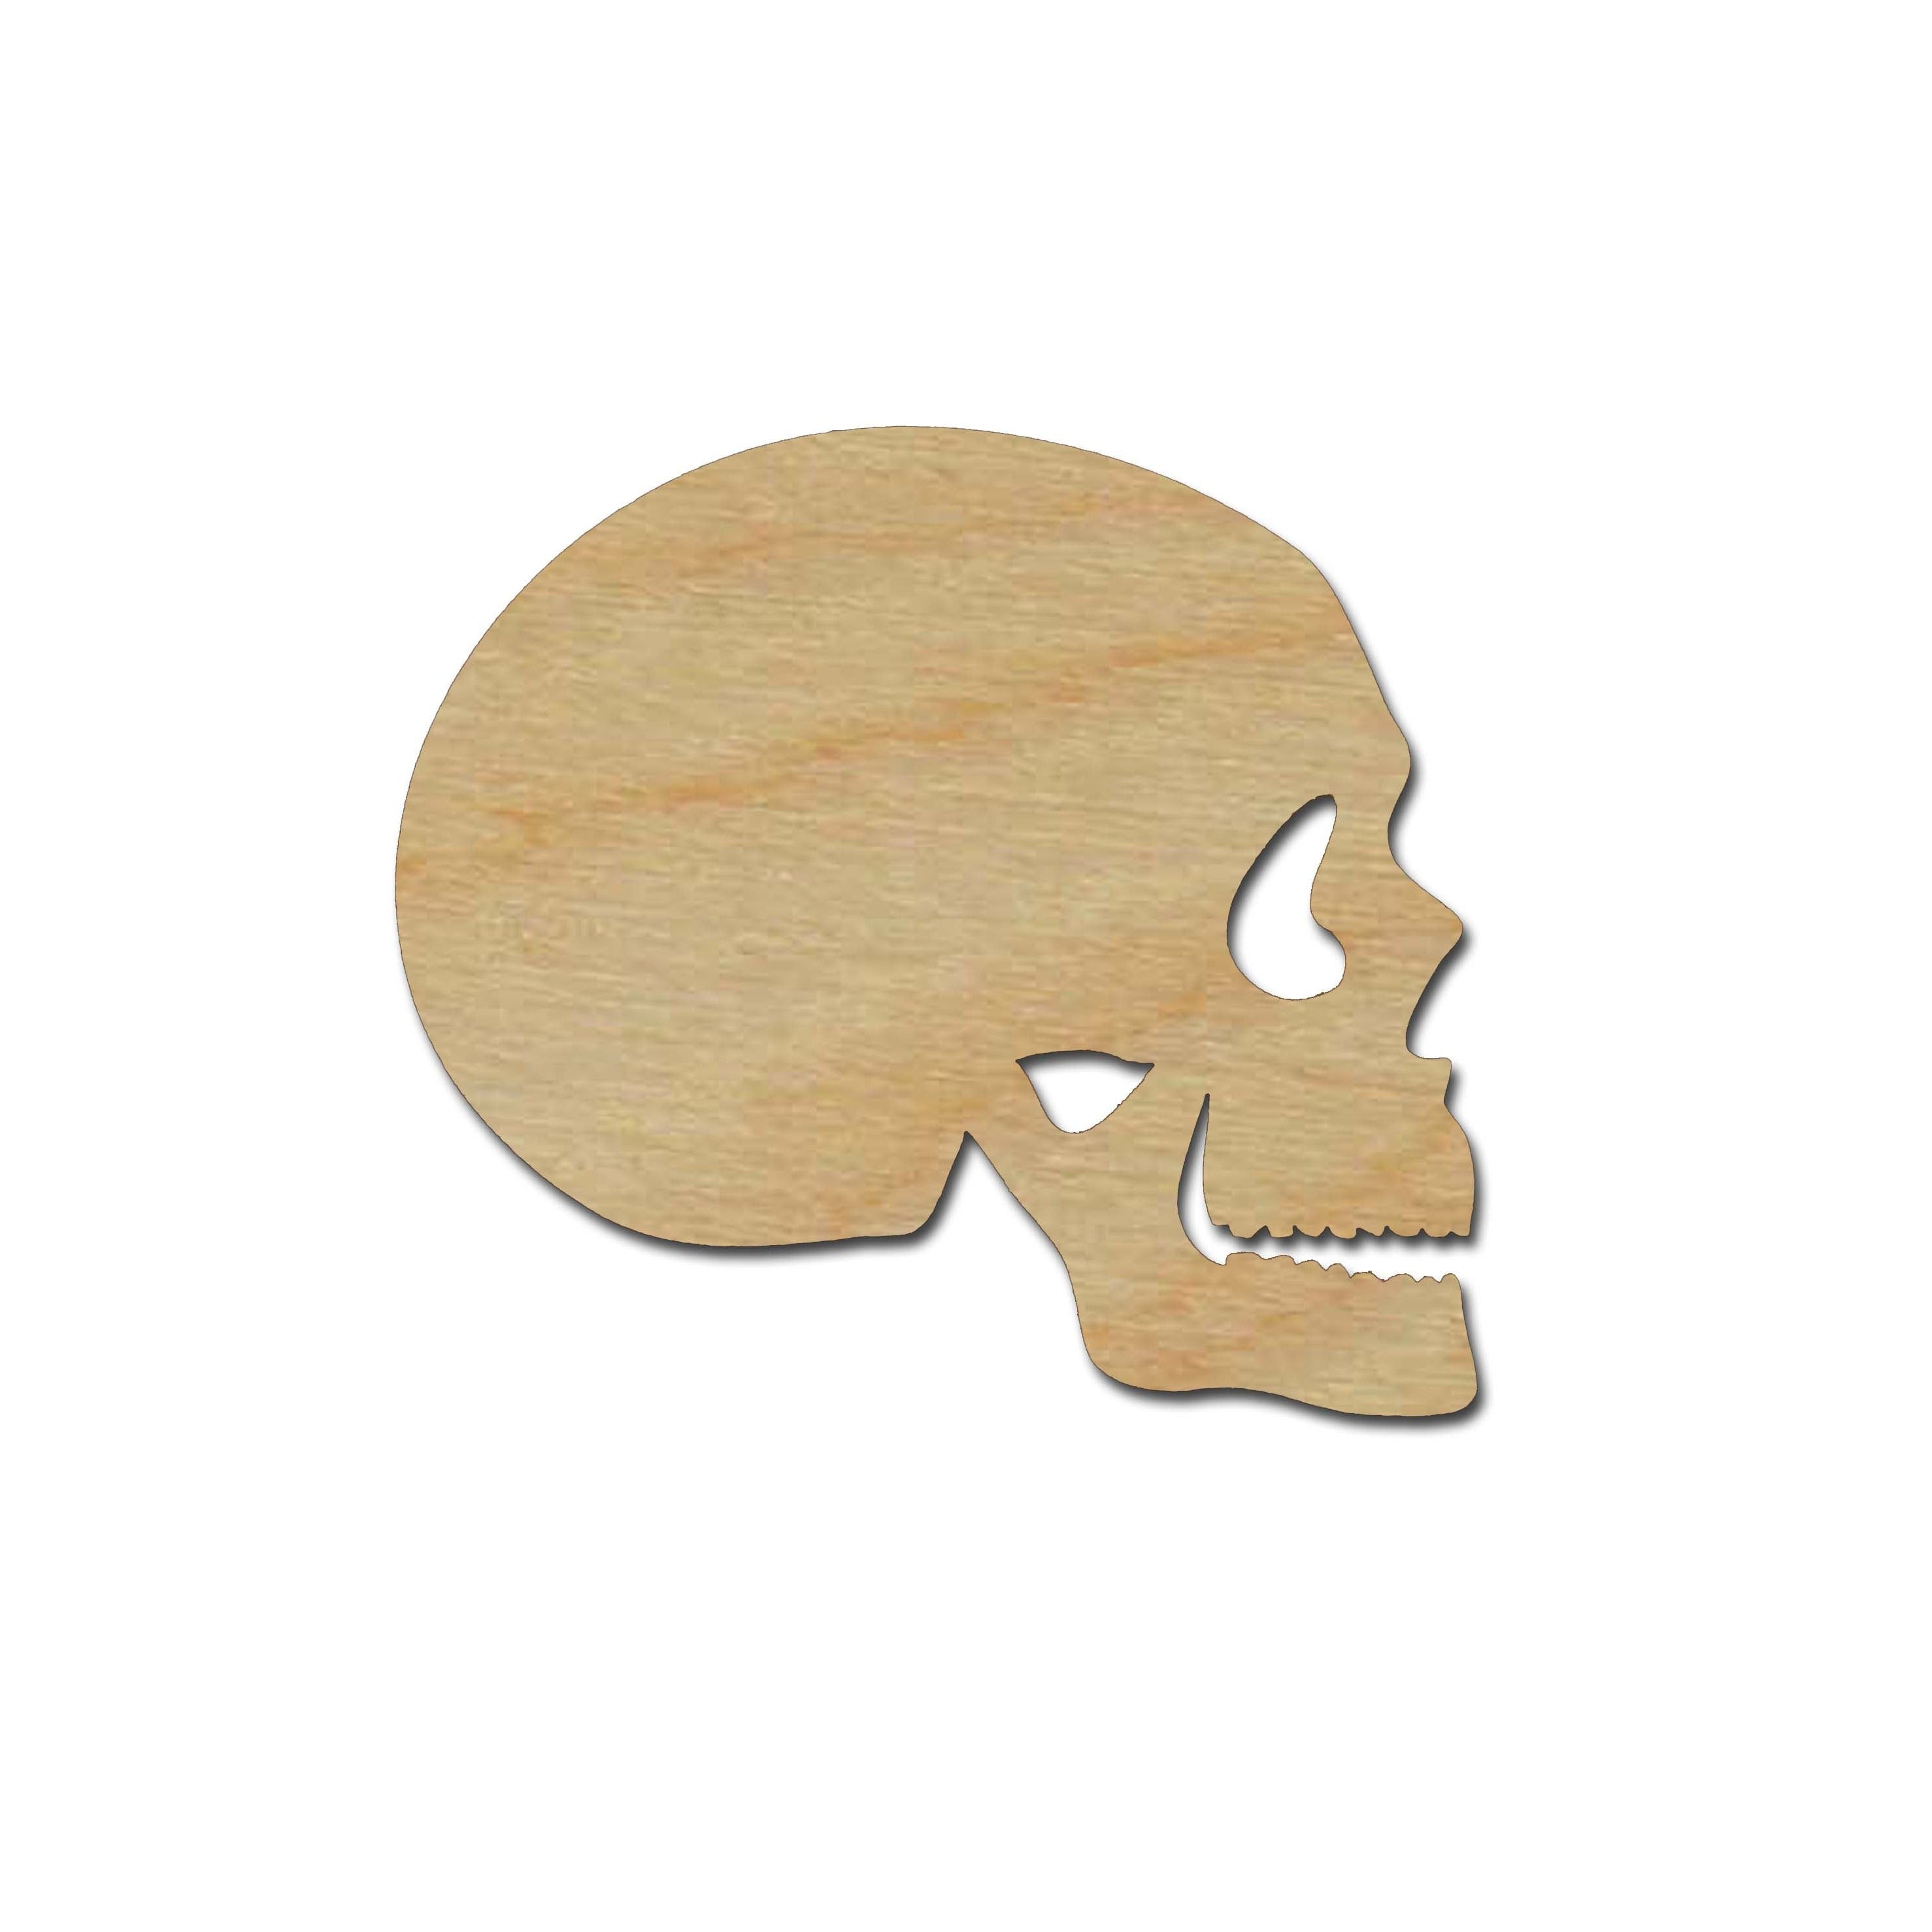 Skull Wood Cut Out 